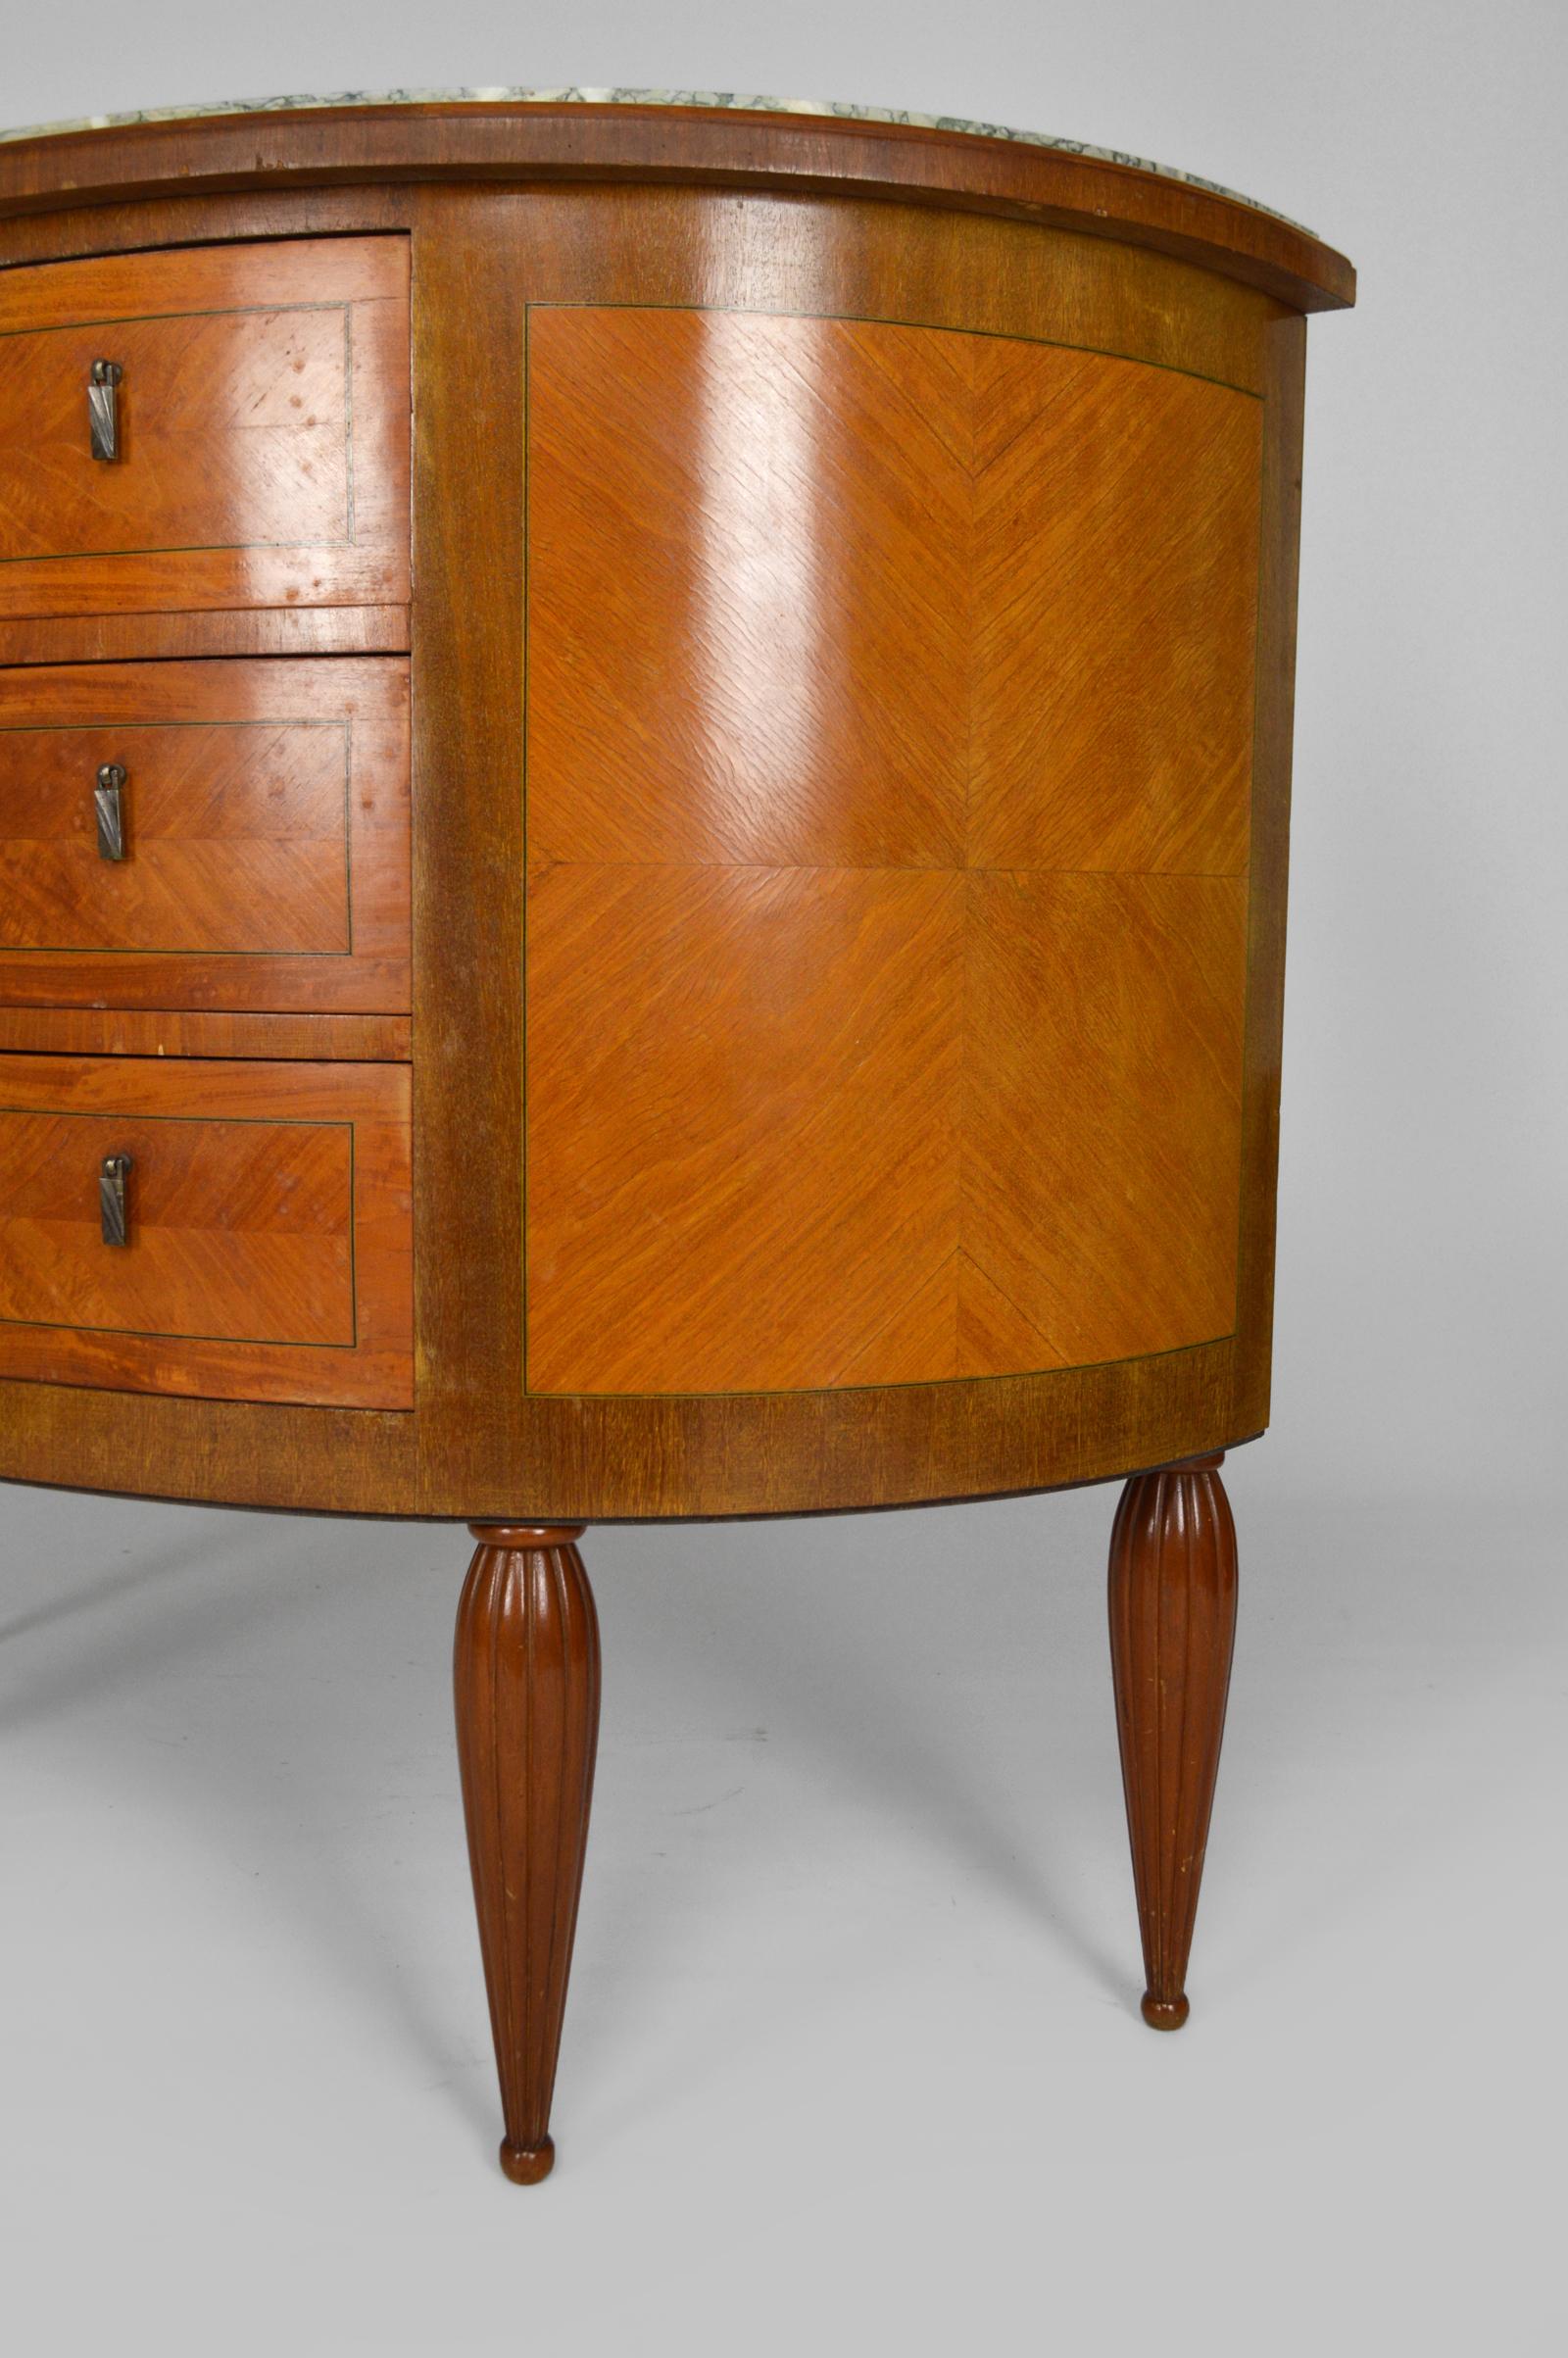 Art Deco Demilune Mahogany & Marble-Top Commode / Chest of Drawers, circa 1925 For Sale 1